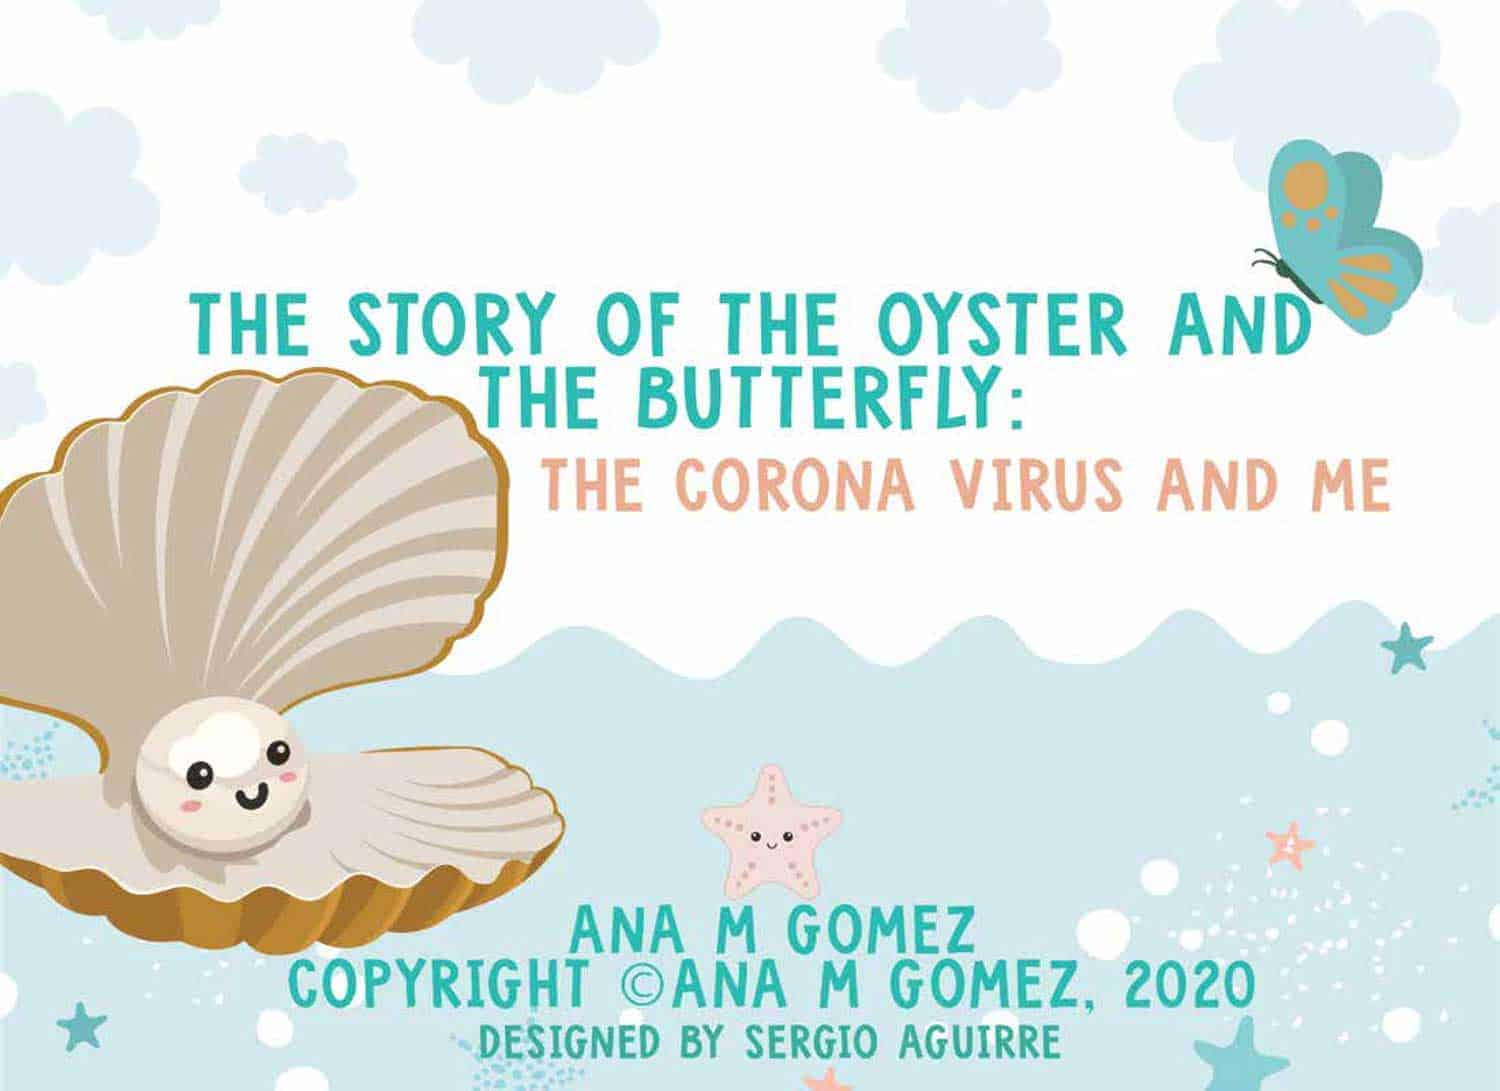 The Story of the Oyster and the Butterfly